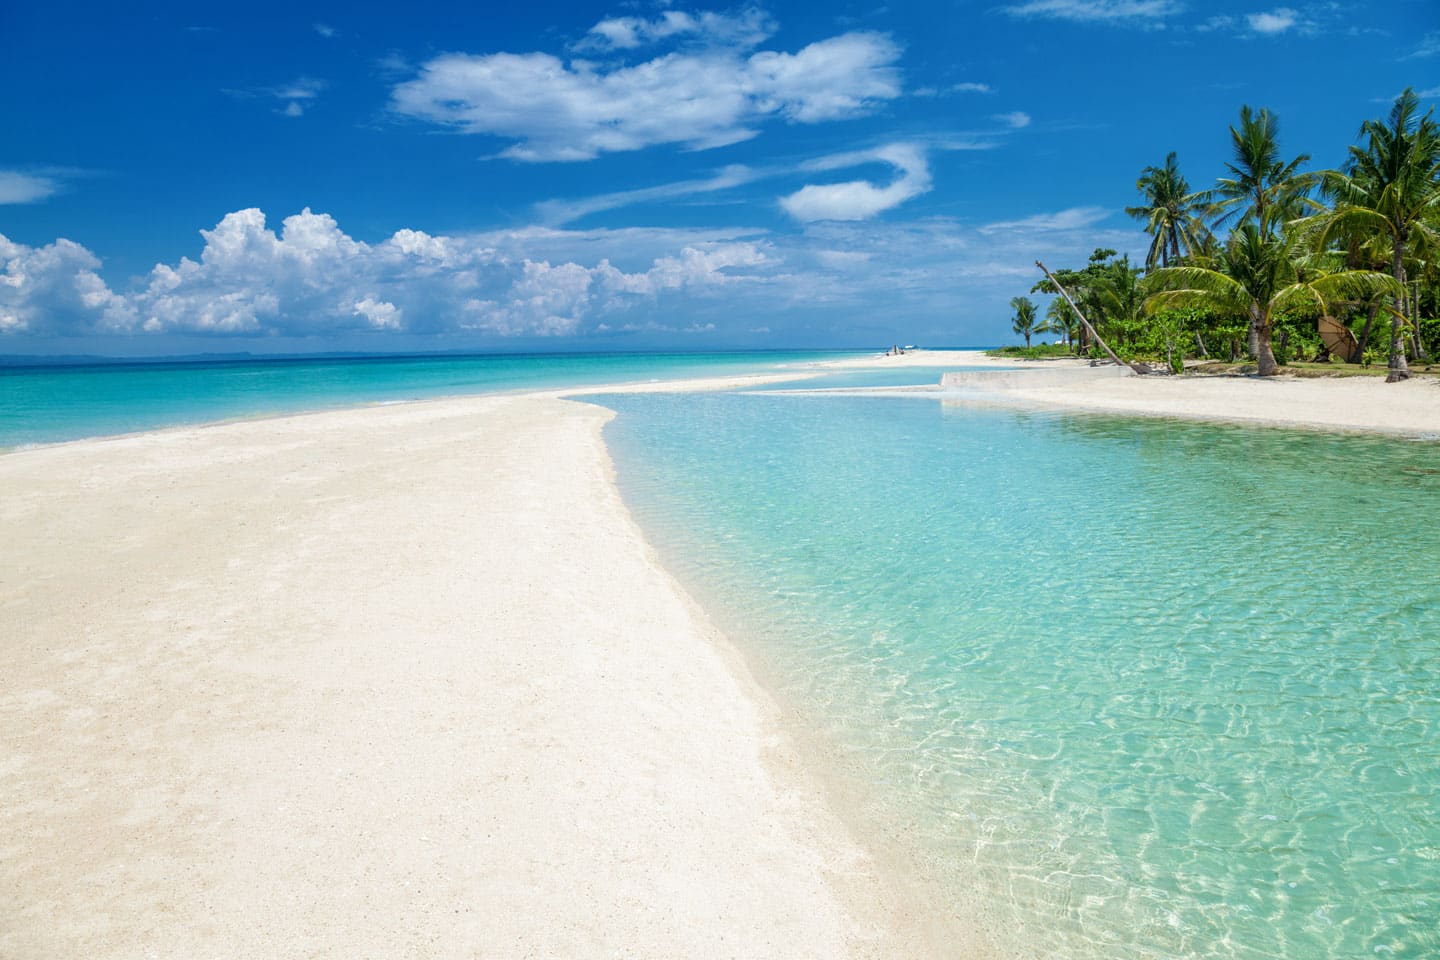 Beaches In The Philippine Islands